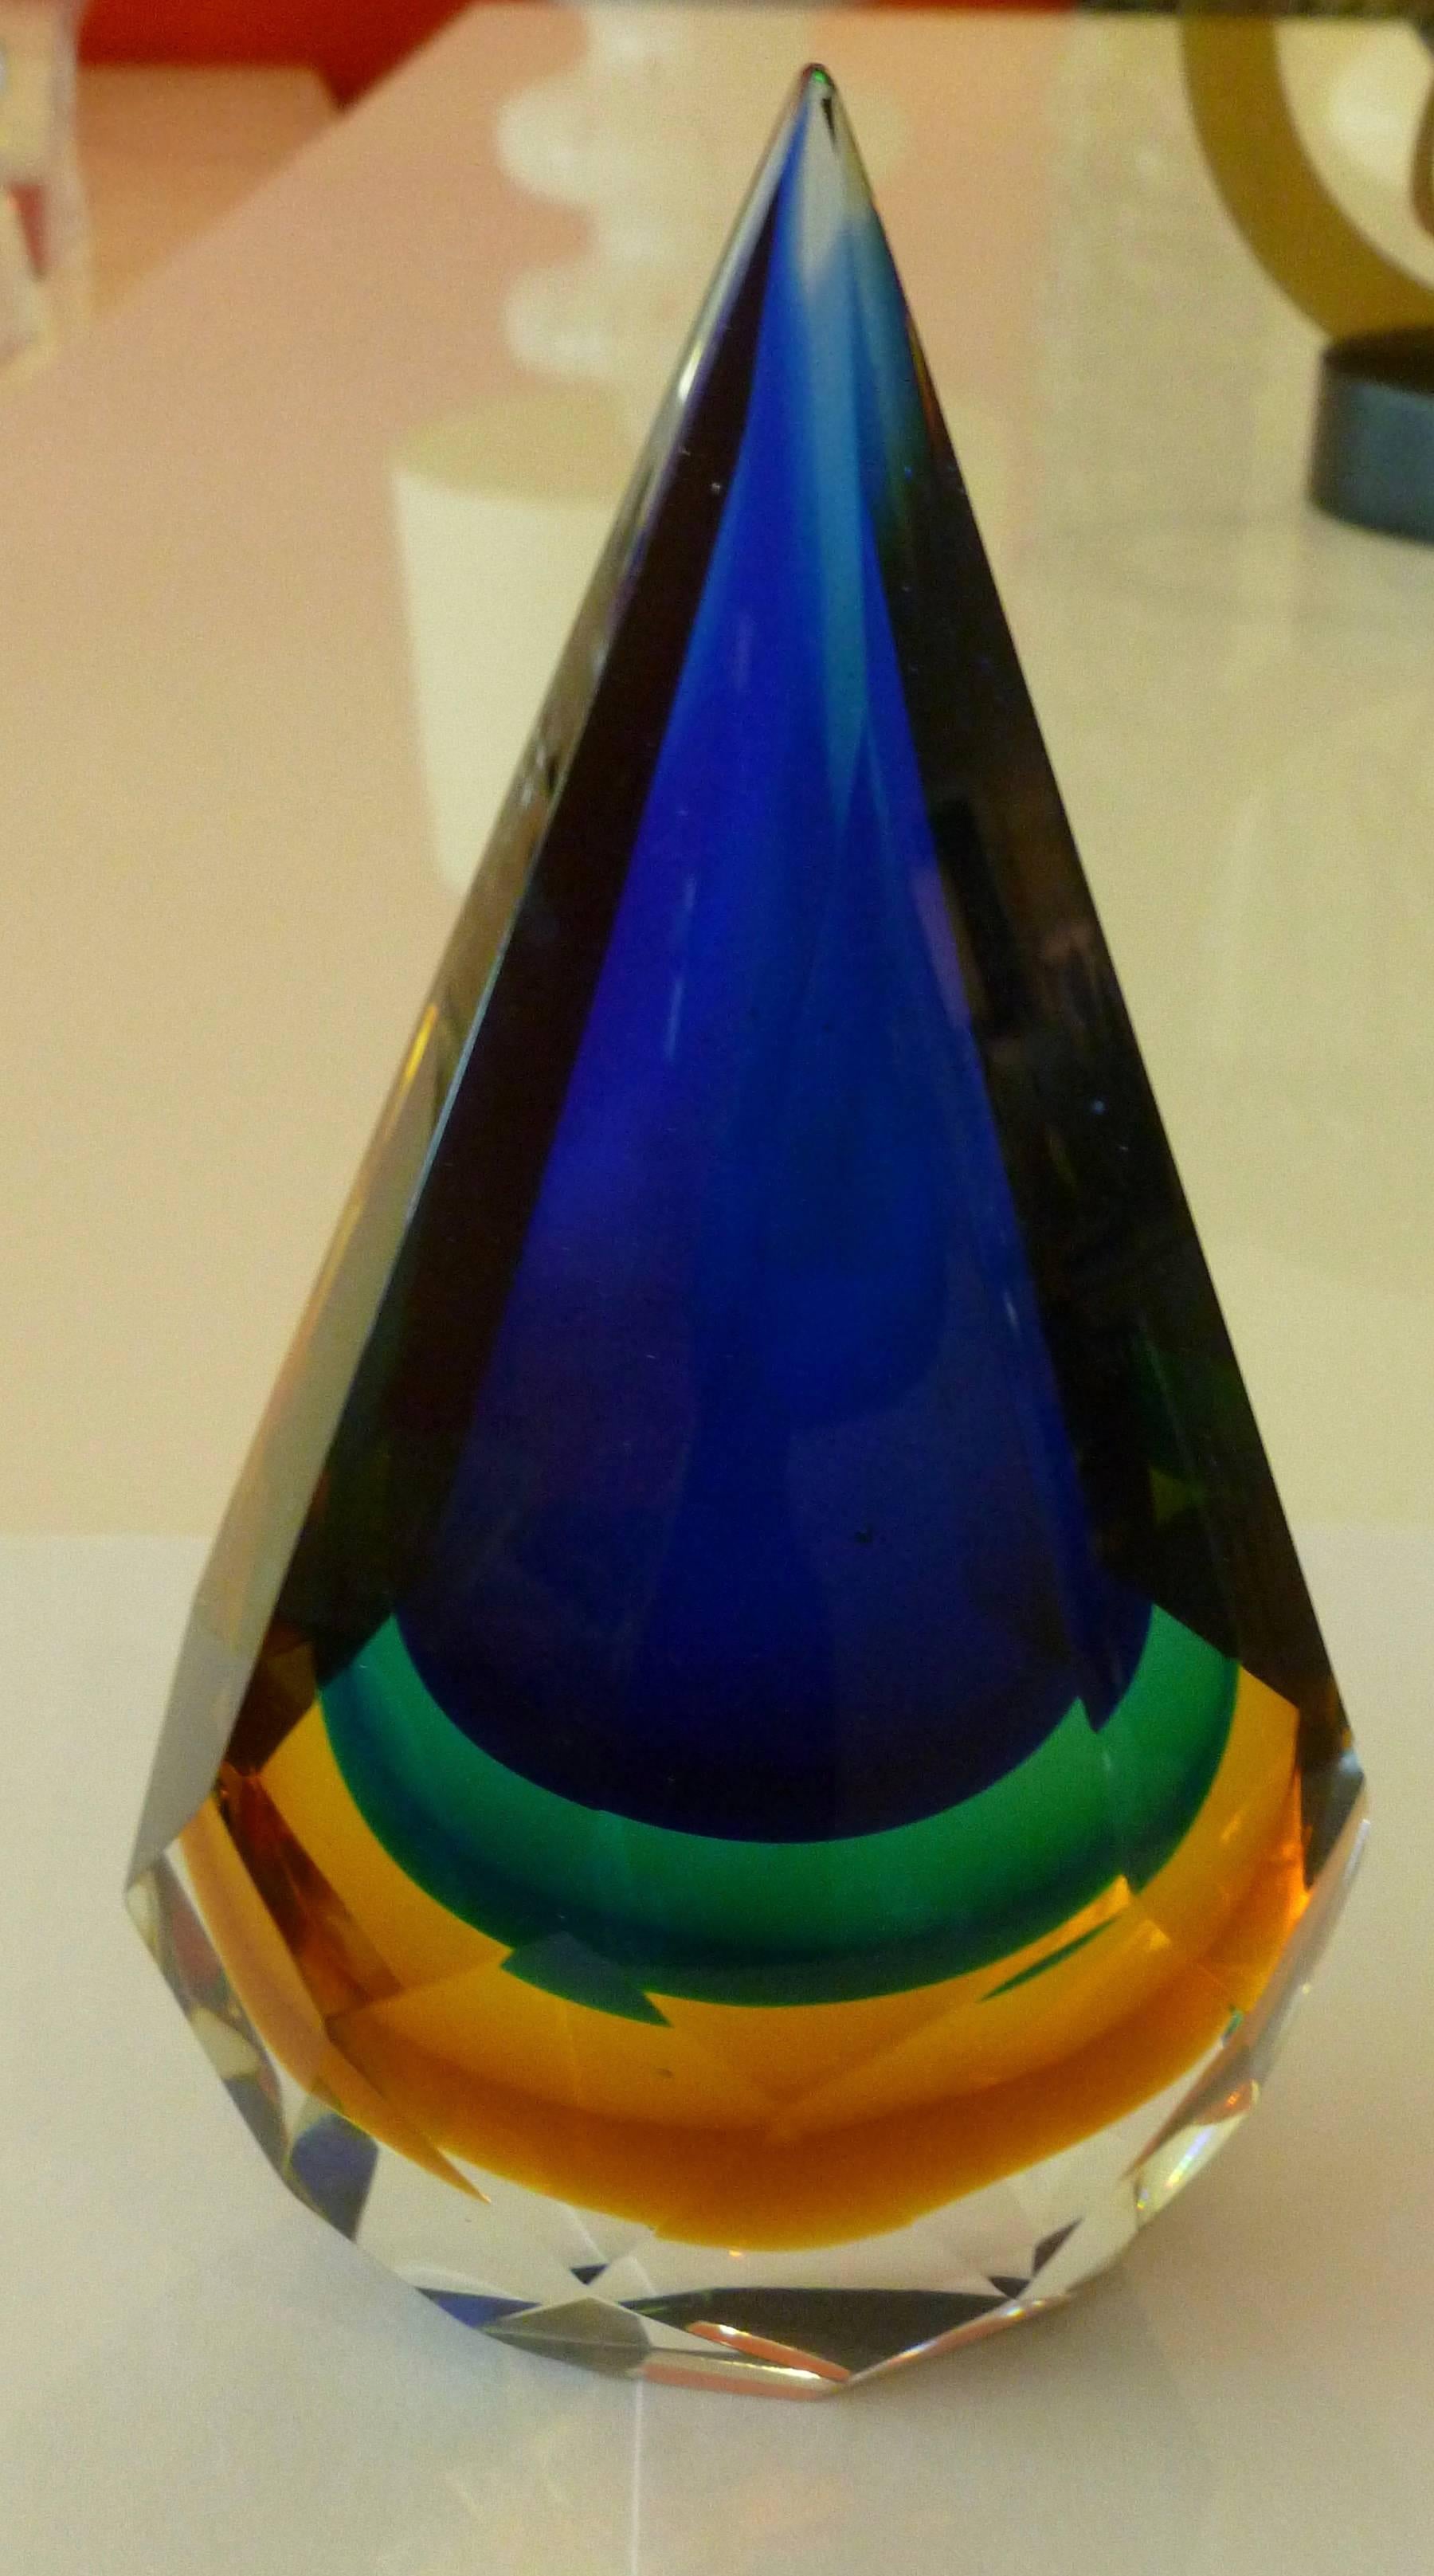 This stunning and most unusual Italian Murano diamond faceted Sommerso glass paperweight /desk accessory glass sculpture are layers of colors of clear, amber, yellow, kelly green and brilliant royal blue. It has a pointed tip. It is the work of